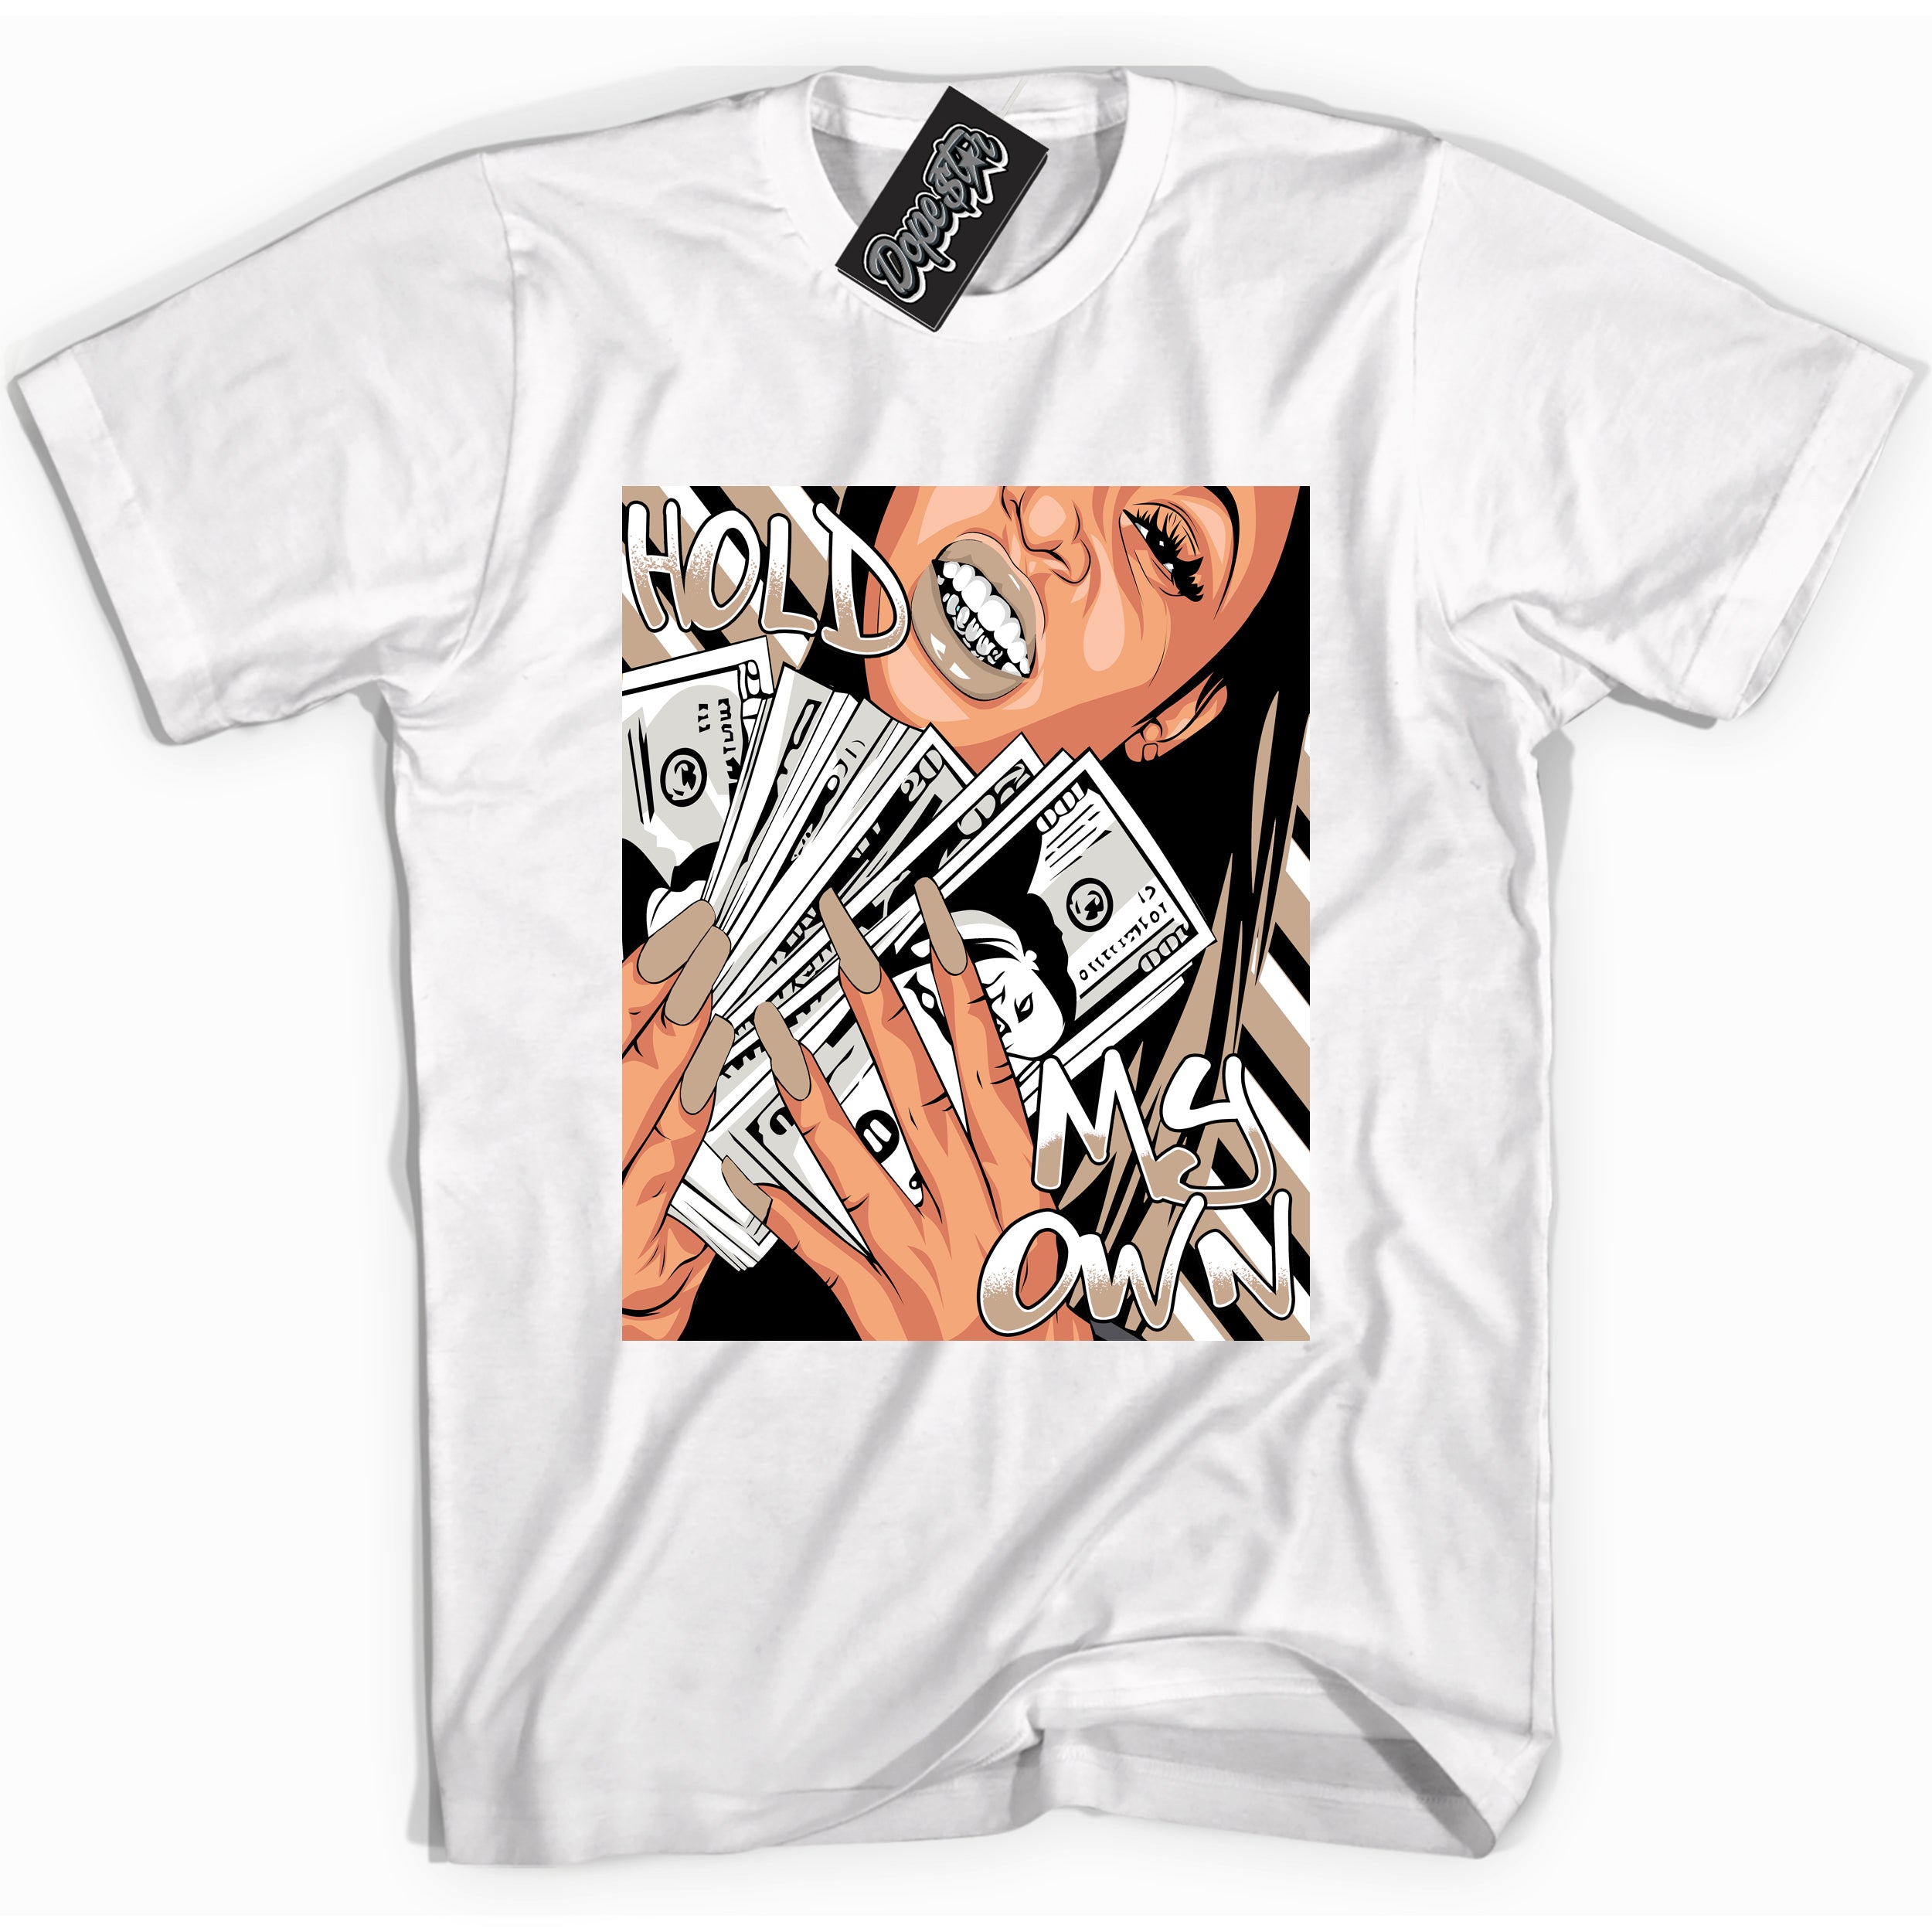 Cool White graphic tee with “ Hold My Own ” design, that perfectly matches Palomino 1s sneakers 